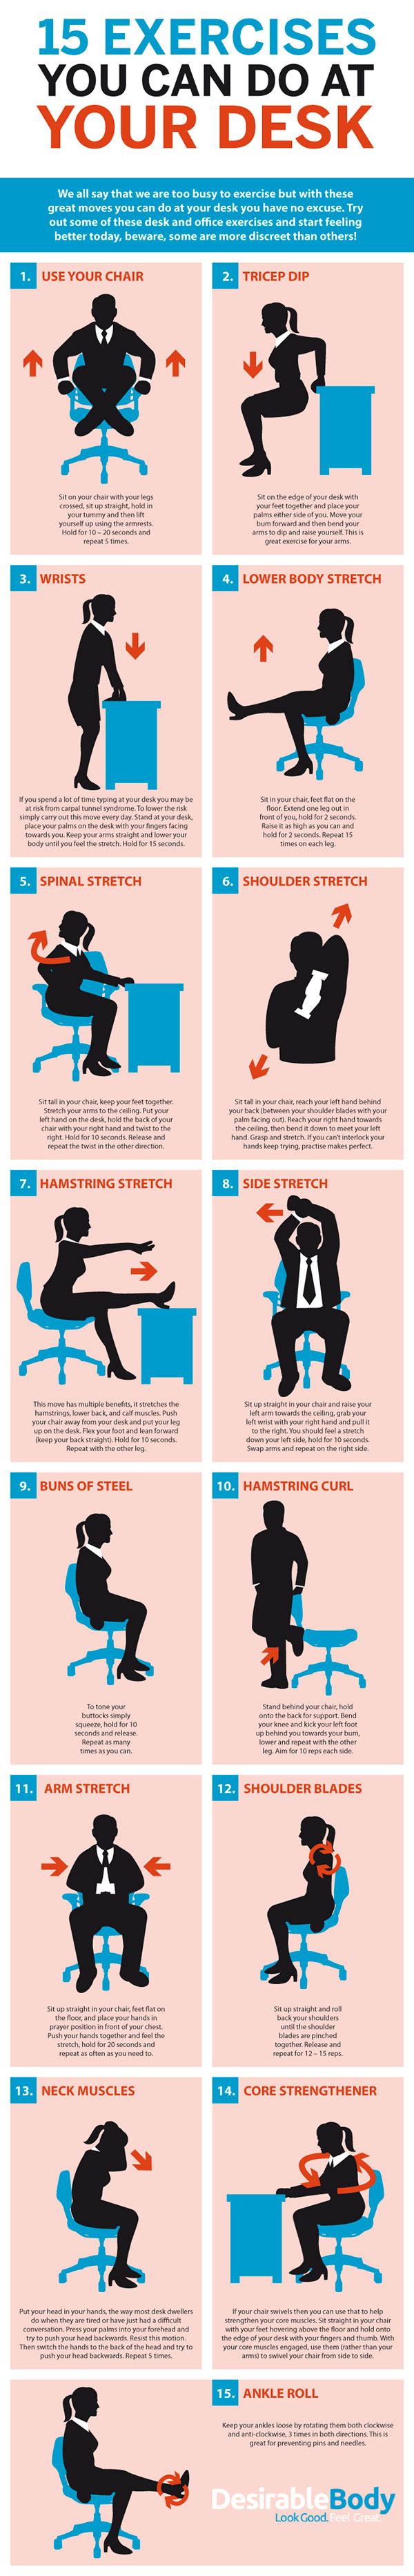 Deskercise 15 Simple Exercises You Can Do At Your Desk Diy Genius